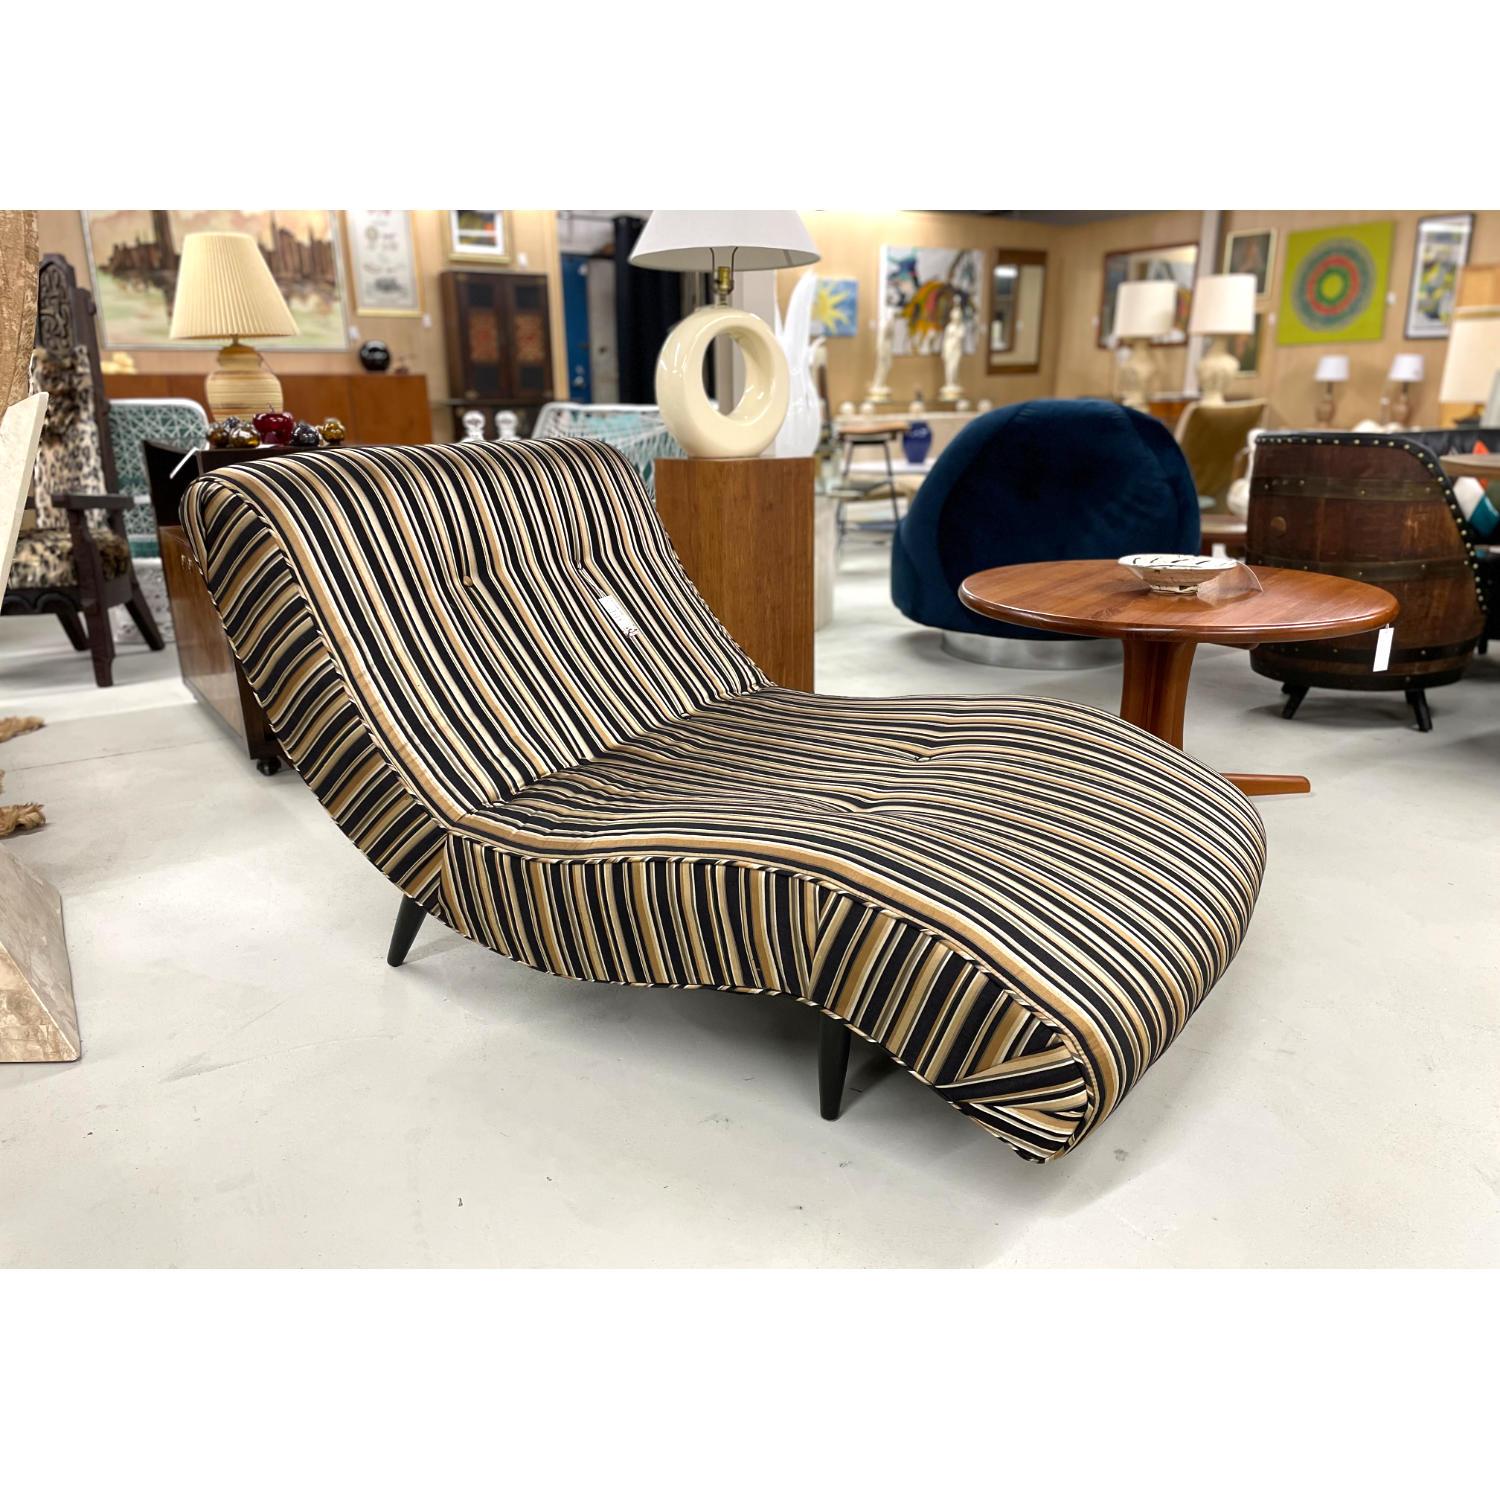 Adrian Pearsall wave lounge chair. Big enough to stand alone as a sofa like seating solution. Imagine yourself reclining in this Mid-Century Modern darling while watching one of your favorite Hitchcock movies. This is atomic age seating with